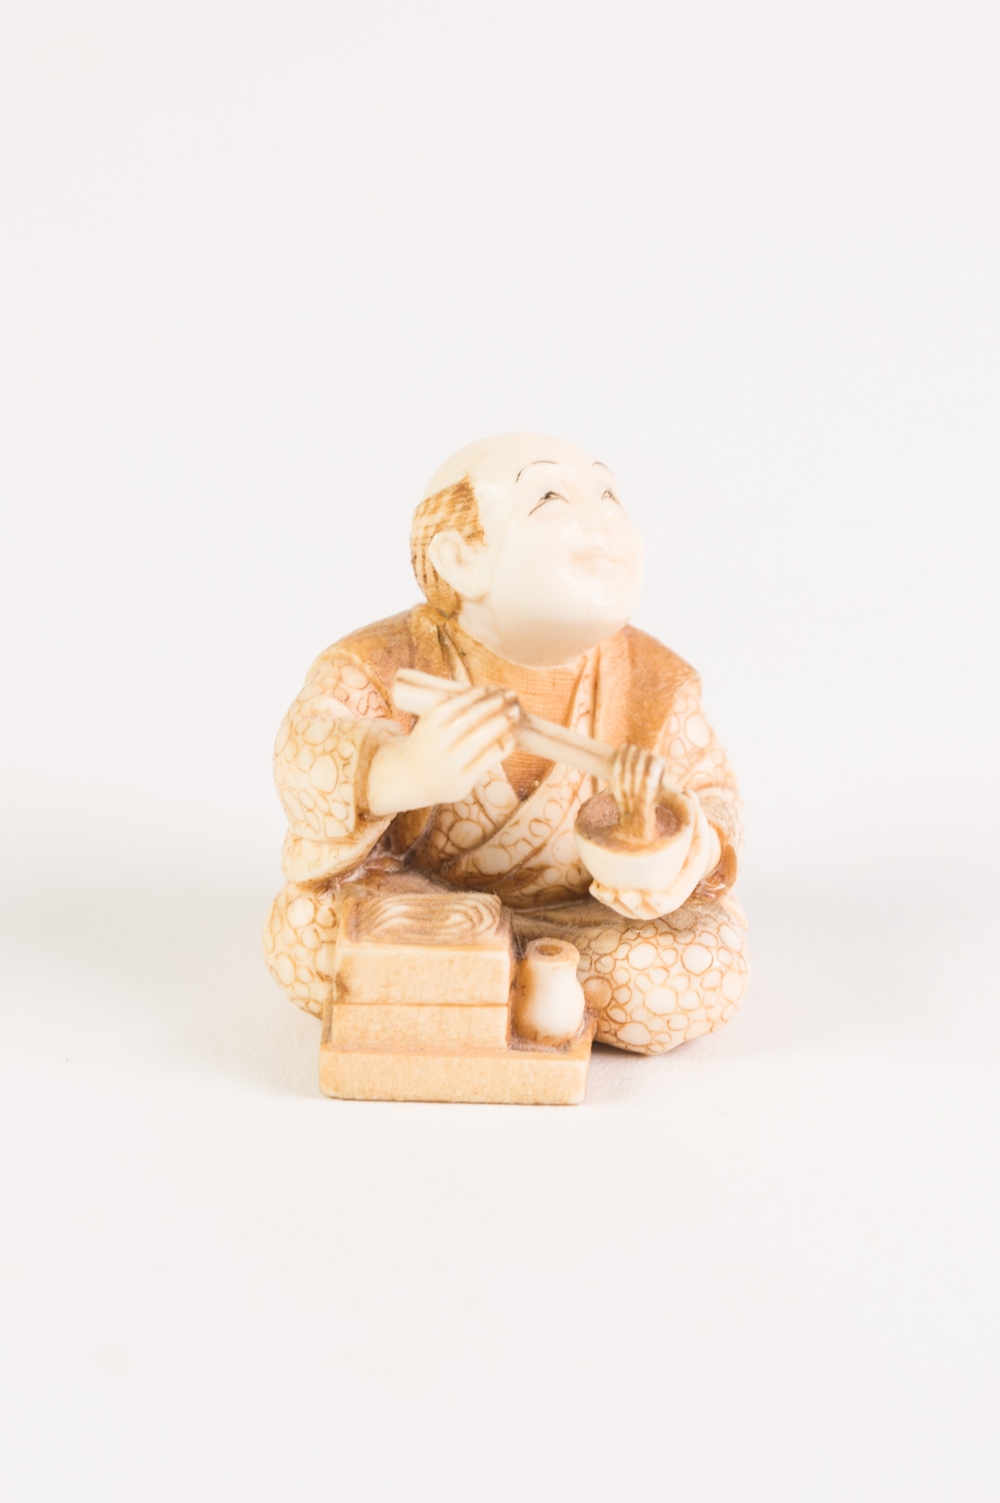 GOOD JAPANESE MEIJI PERIOD CARVED AND, IN PART, LIGHTLY STAINED IVORY NETSUKE OF A SMILING MAN